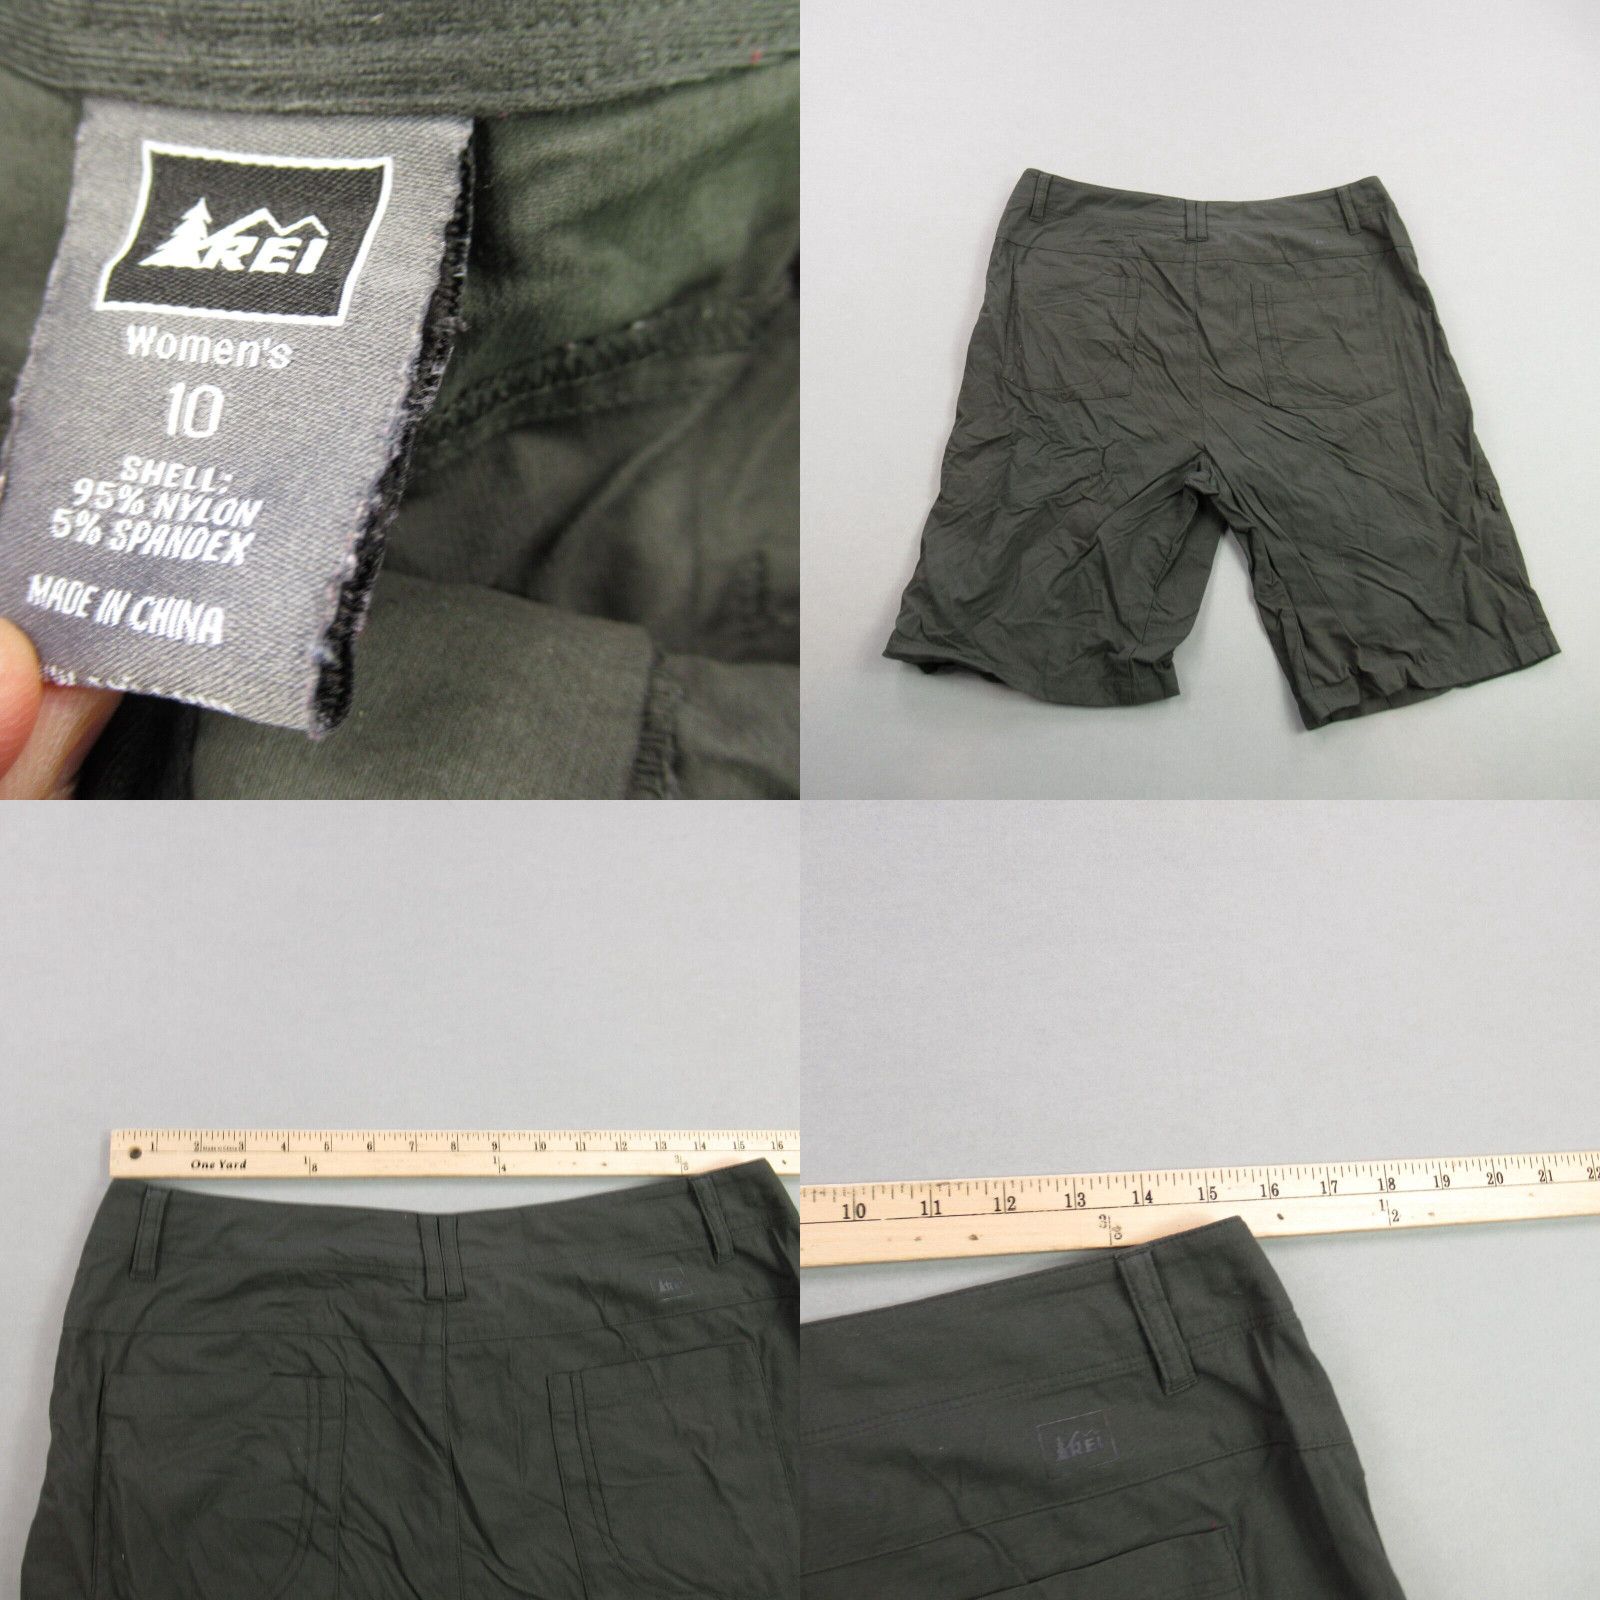 Vintage REI Shorts Womens 10 Lightweight Outdoors Stretch Chino Pockets Green Size 32" / US 10 / IT 46 - 4 Preview